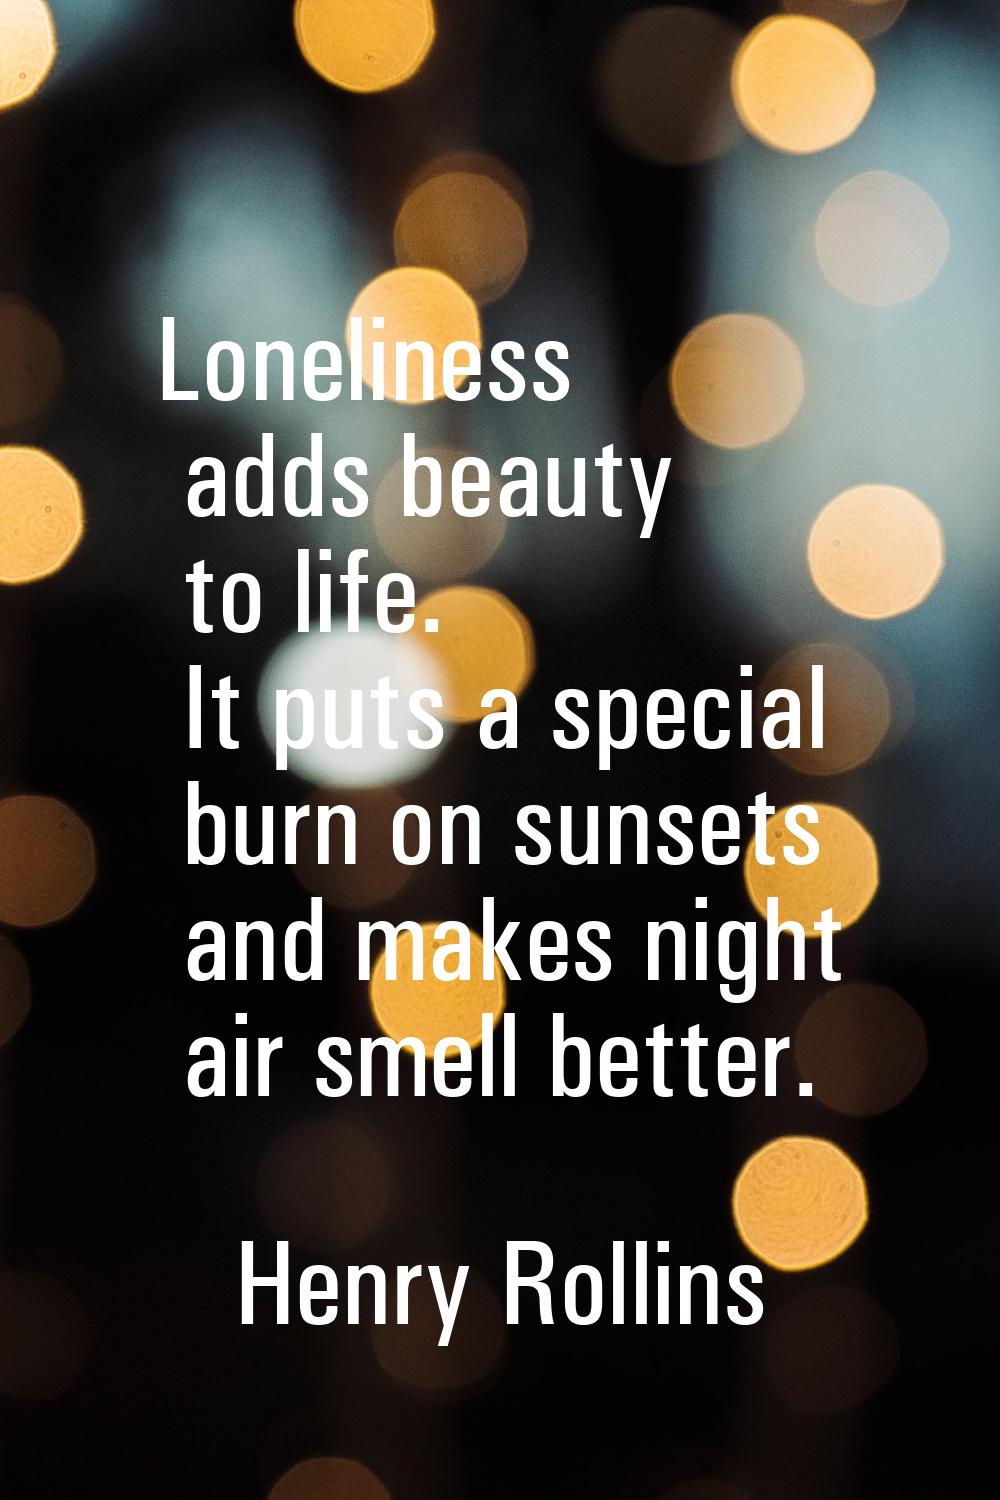 Loneliness adds beauty to life. It puts a special burn on sunsets and makes night air smell better.